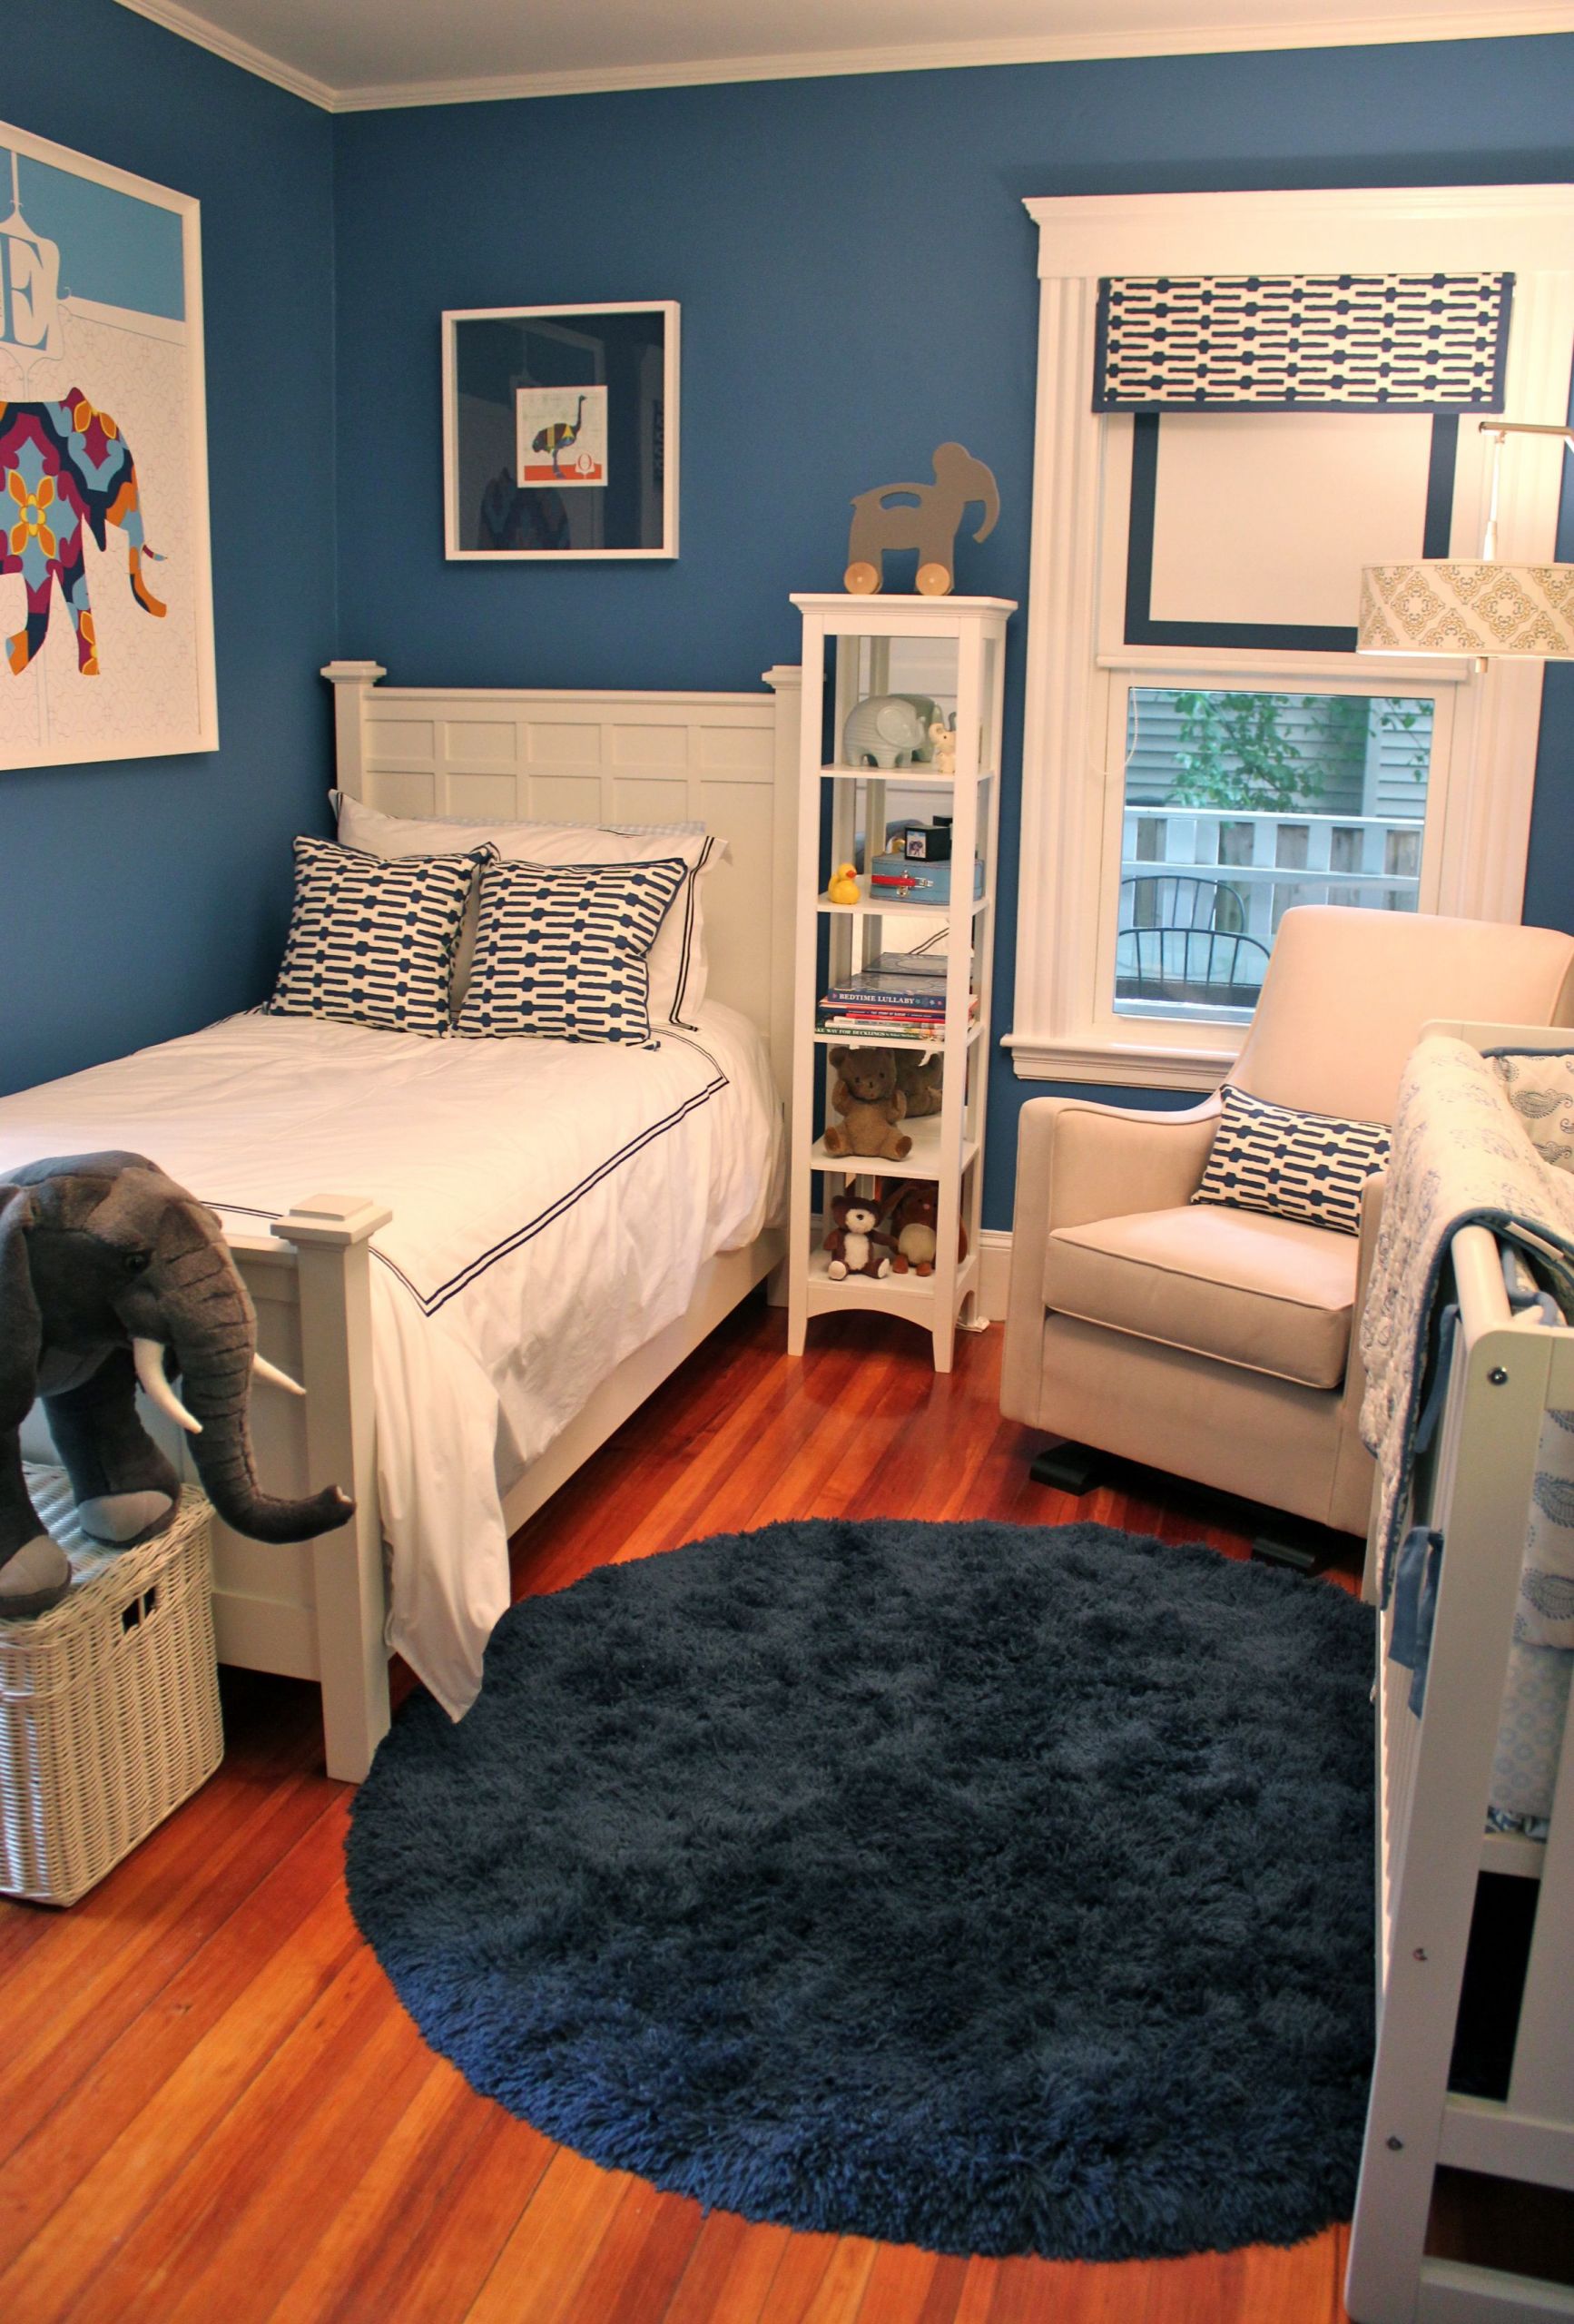 Boys Small Bedroom Ideas
 d Bedroom With images